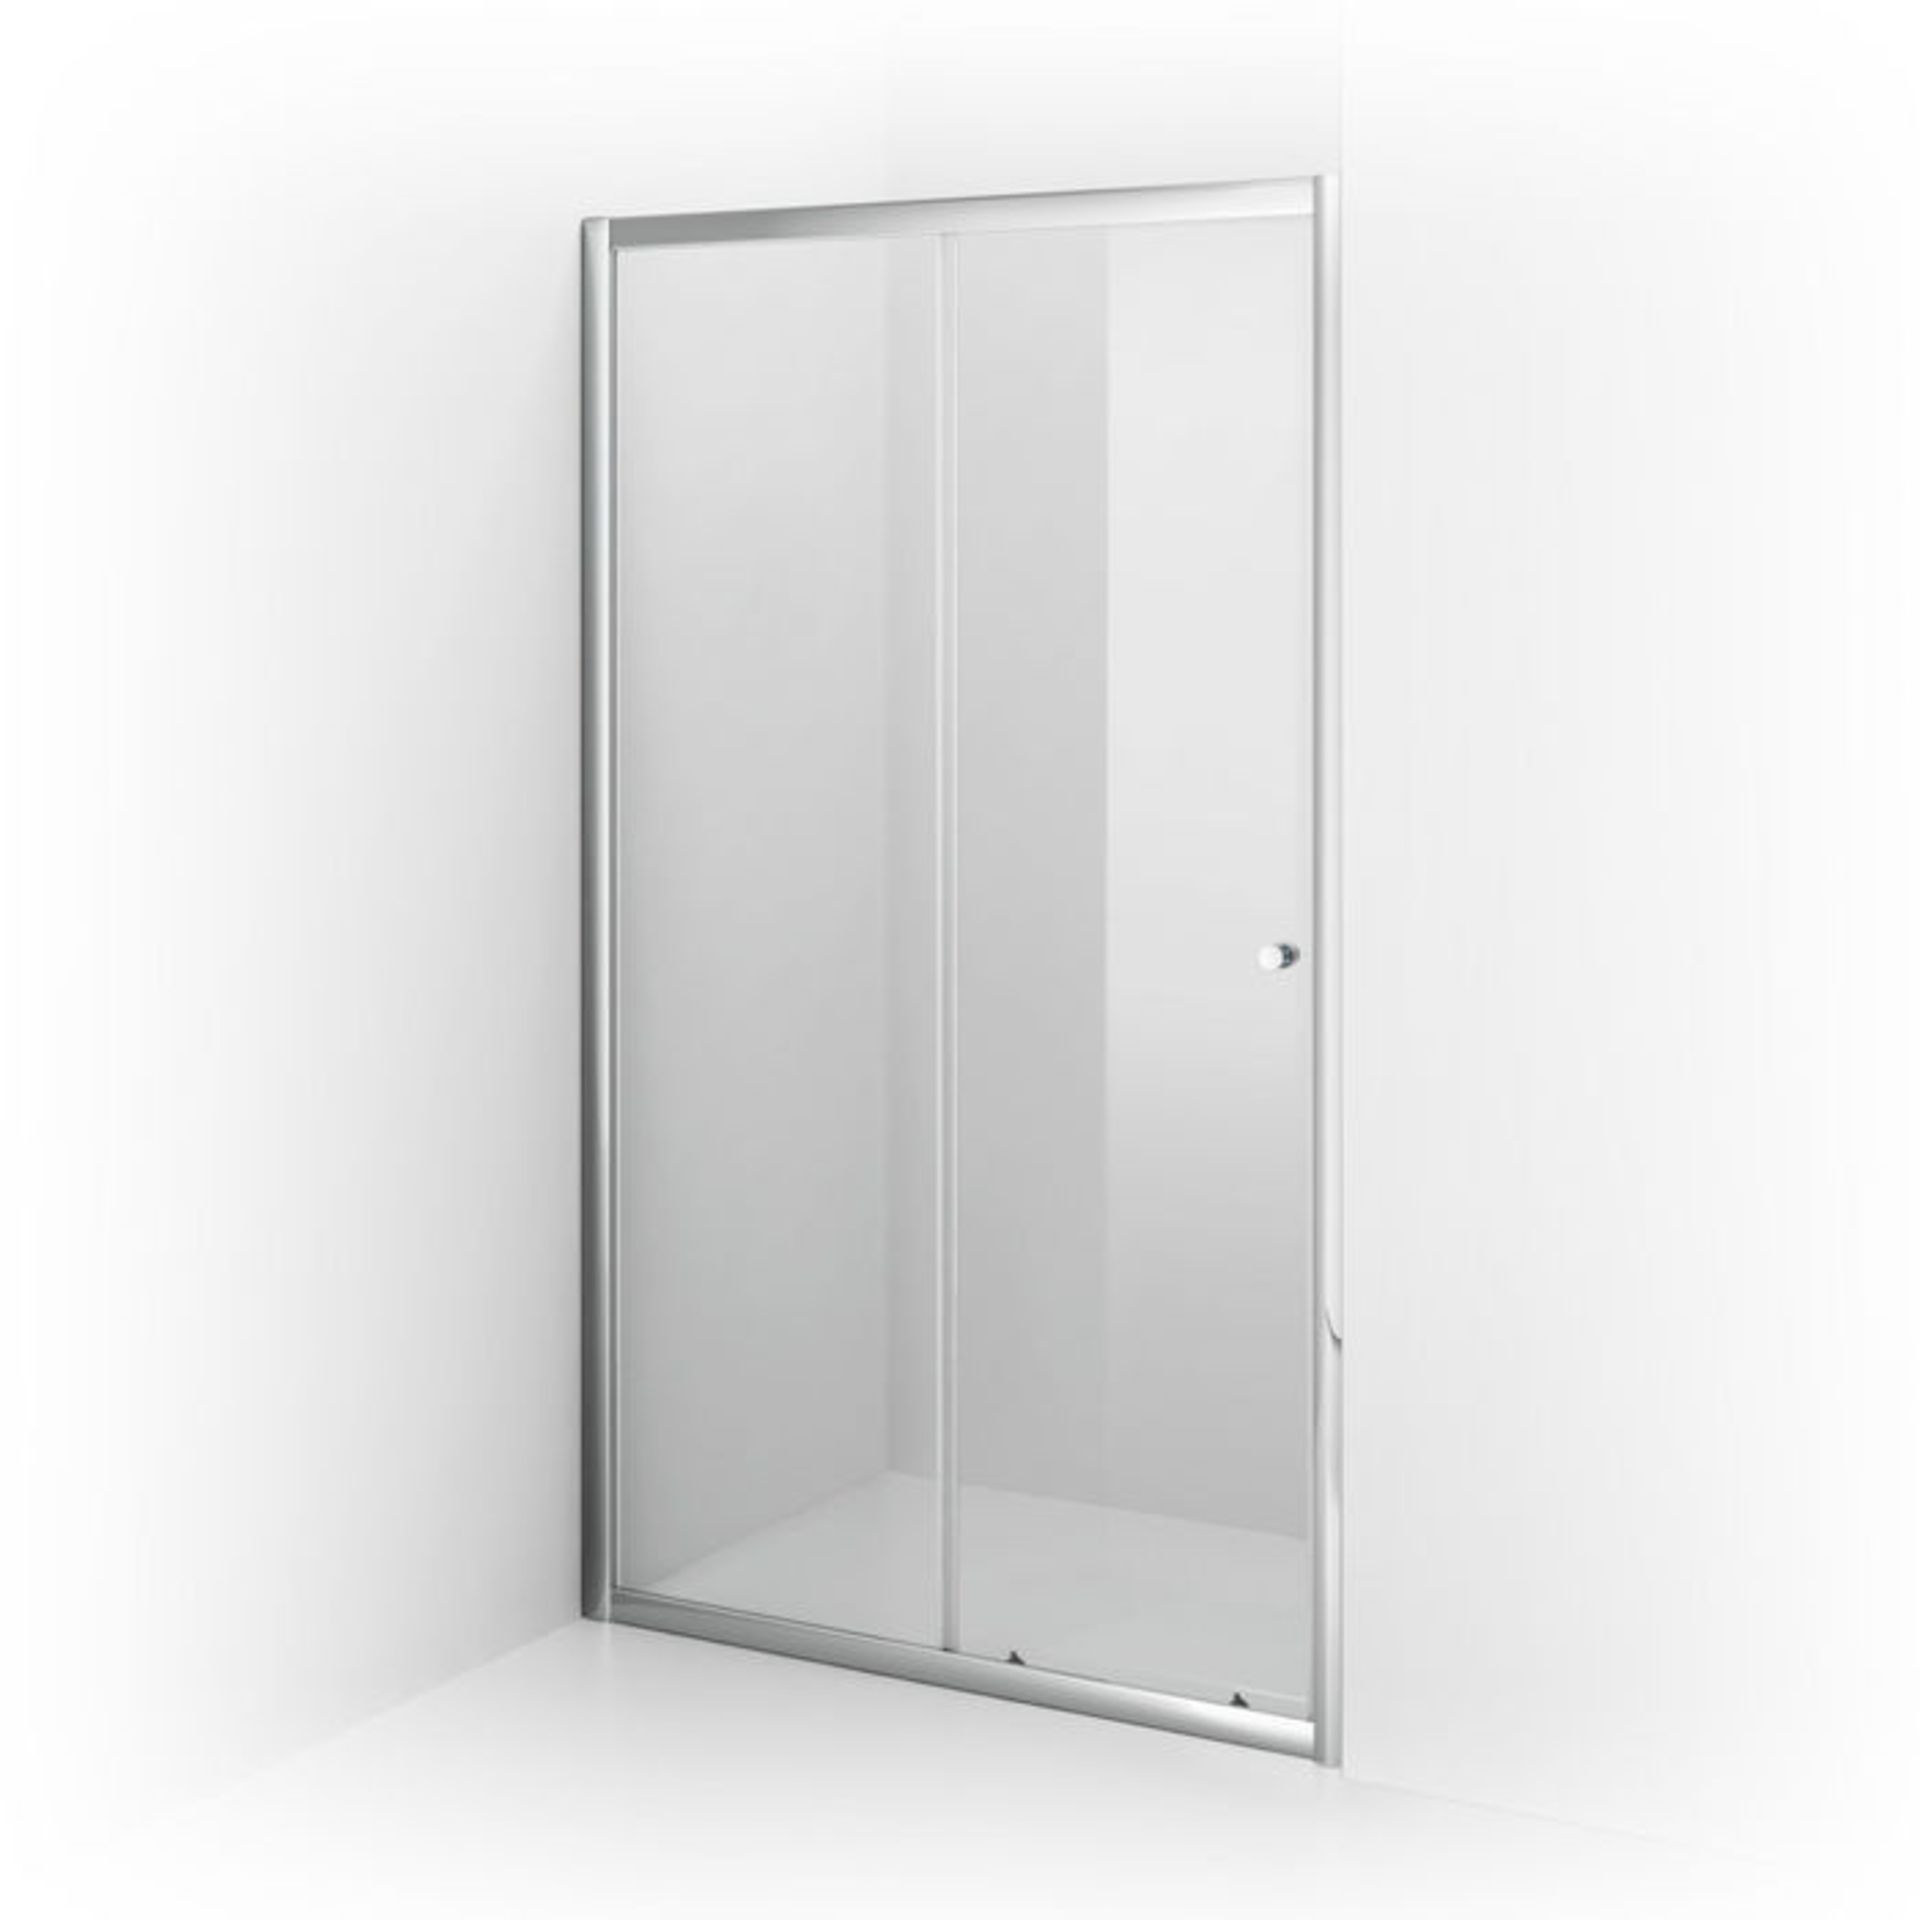 (TS101) 1200mm - Elements Sliding Shower Door. RRP £299.99. 4mm Safety Glass Fully waterproof tested - Image 4 of 4